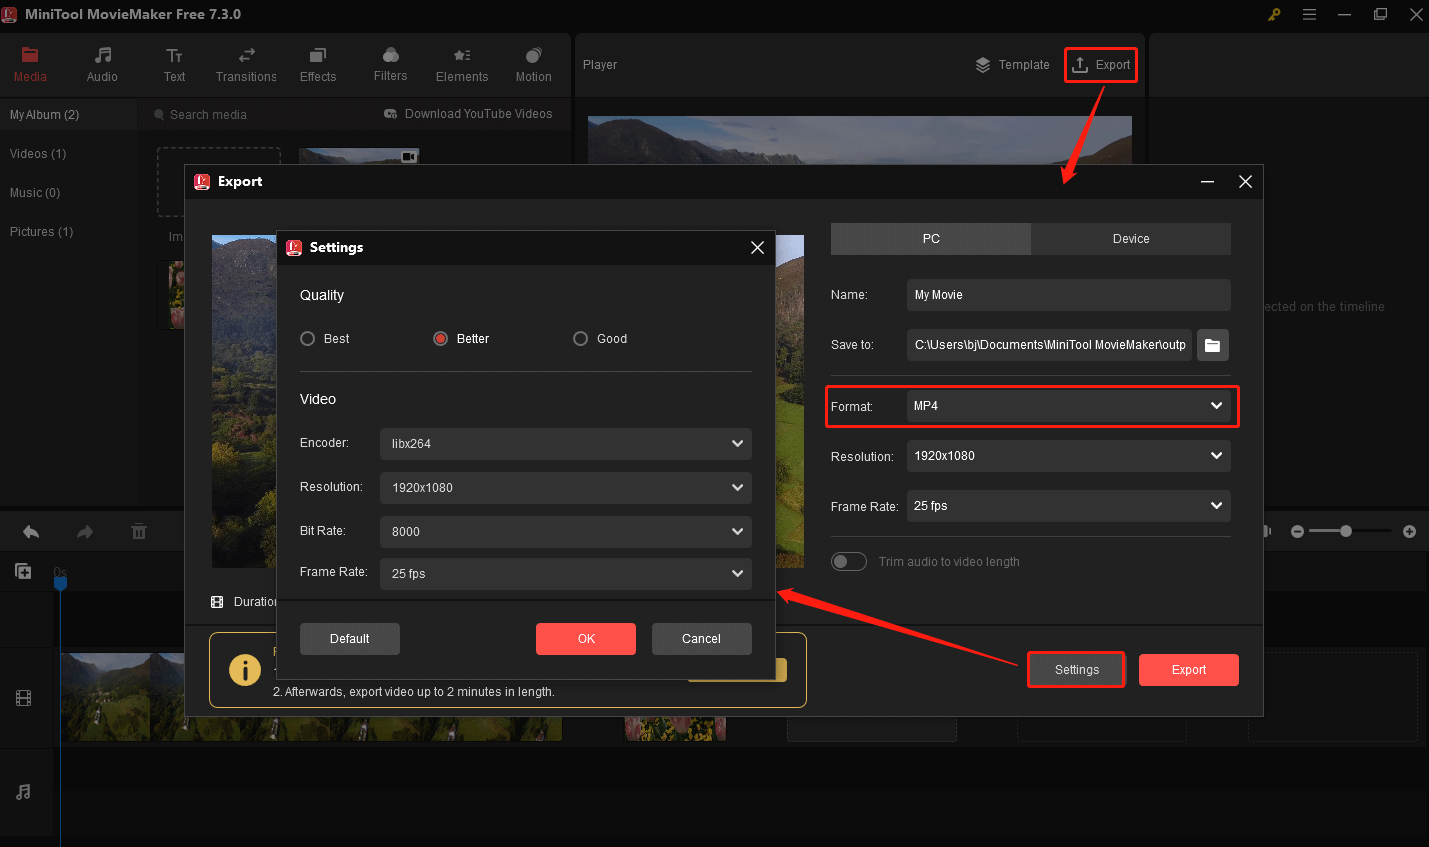 change the format and export